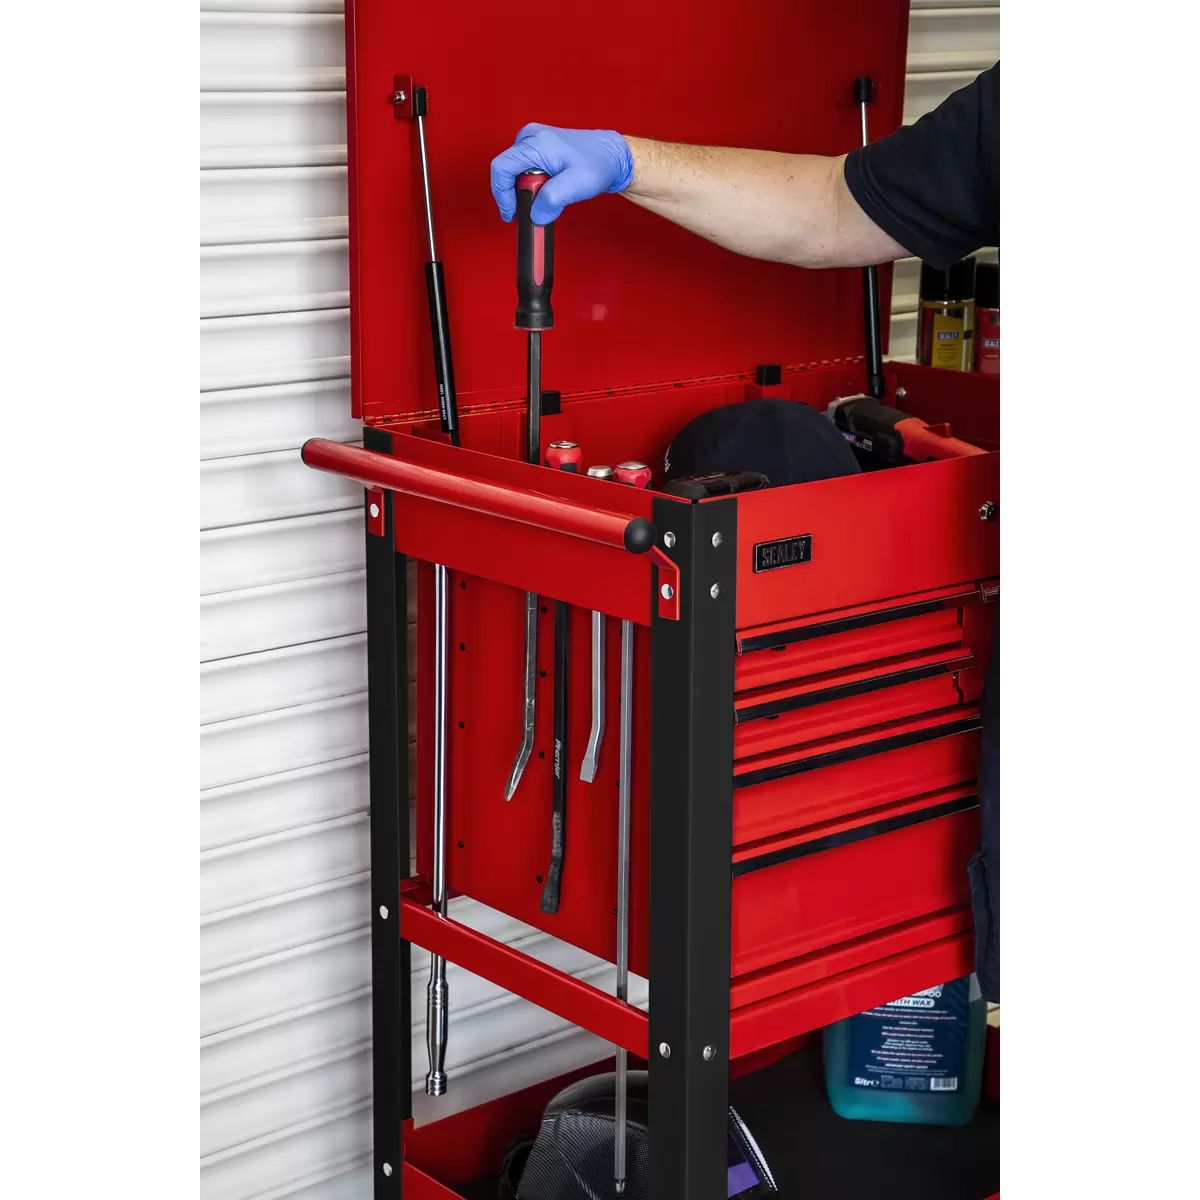 Sealey AP890M Mobile Tool & Parts Trolley with 5 Drawers